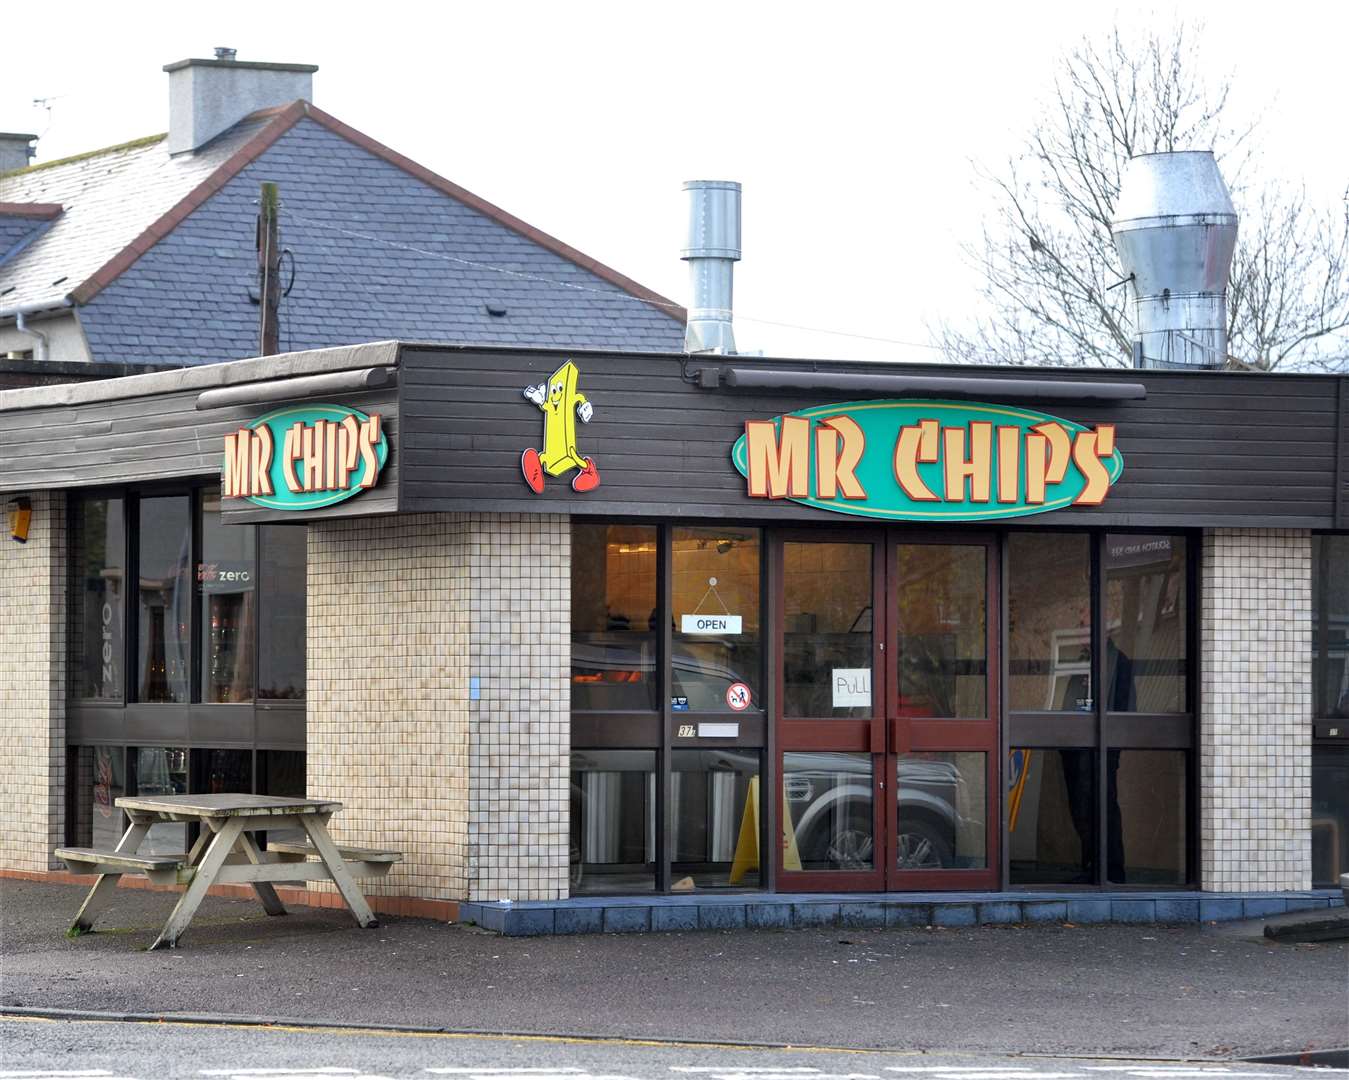 The offence took place at Mr Chips in 2016.